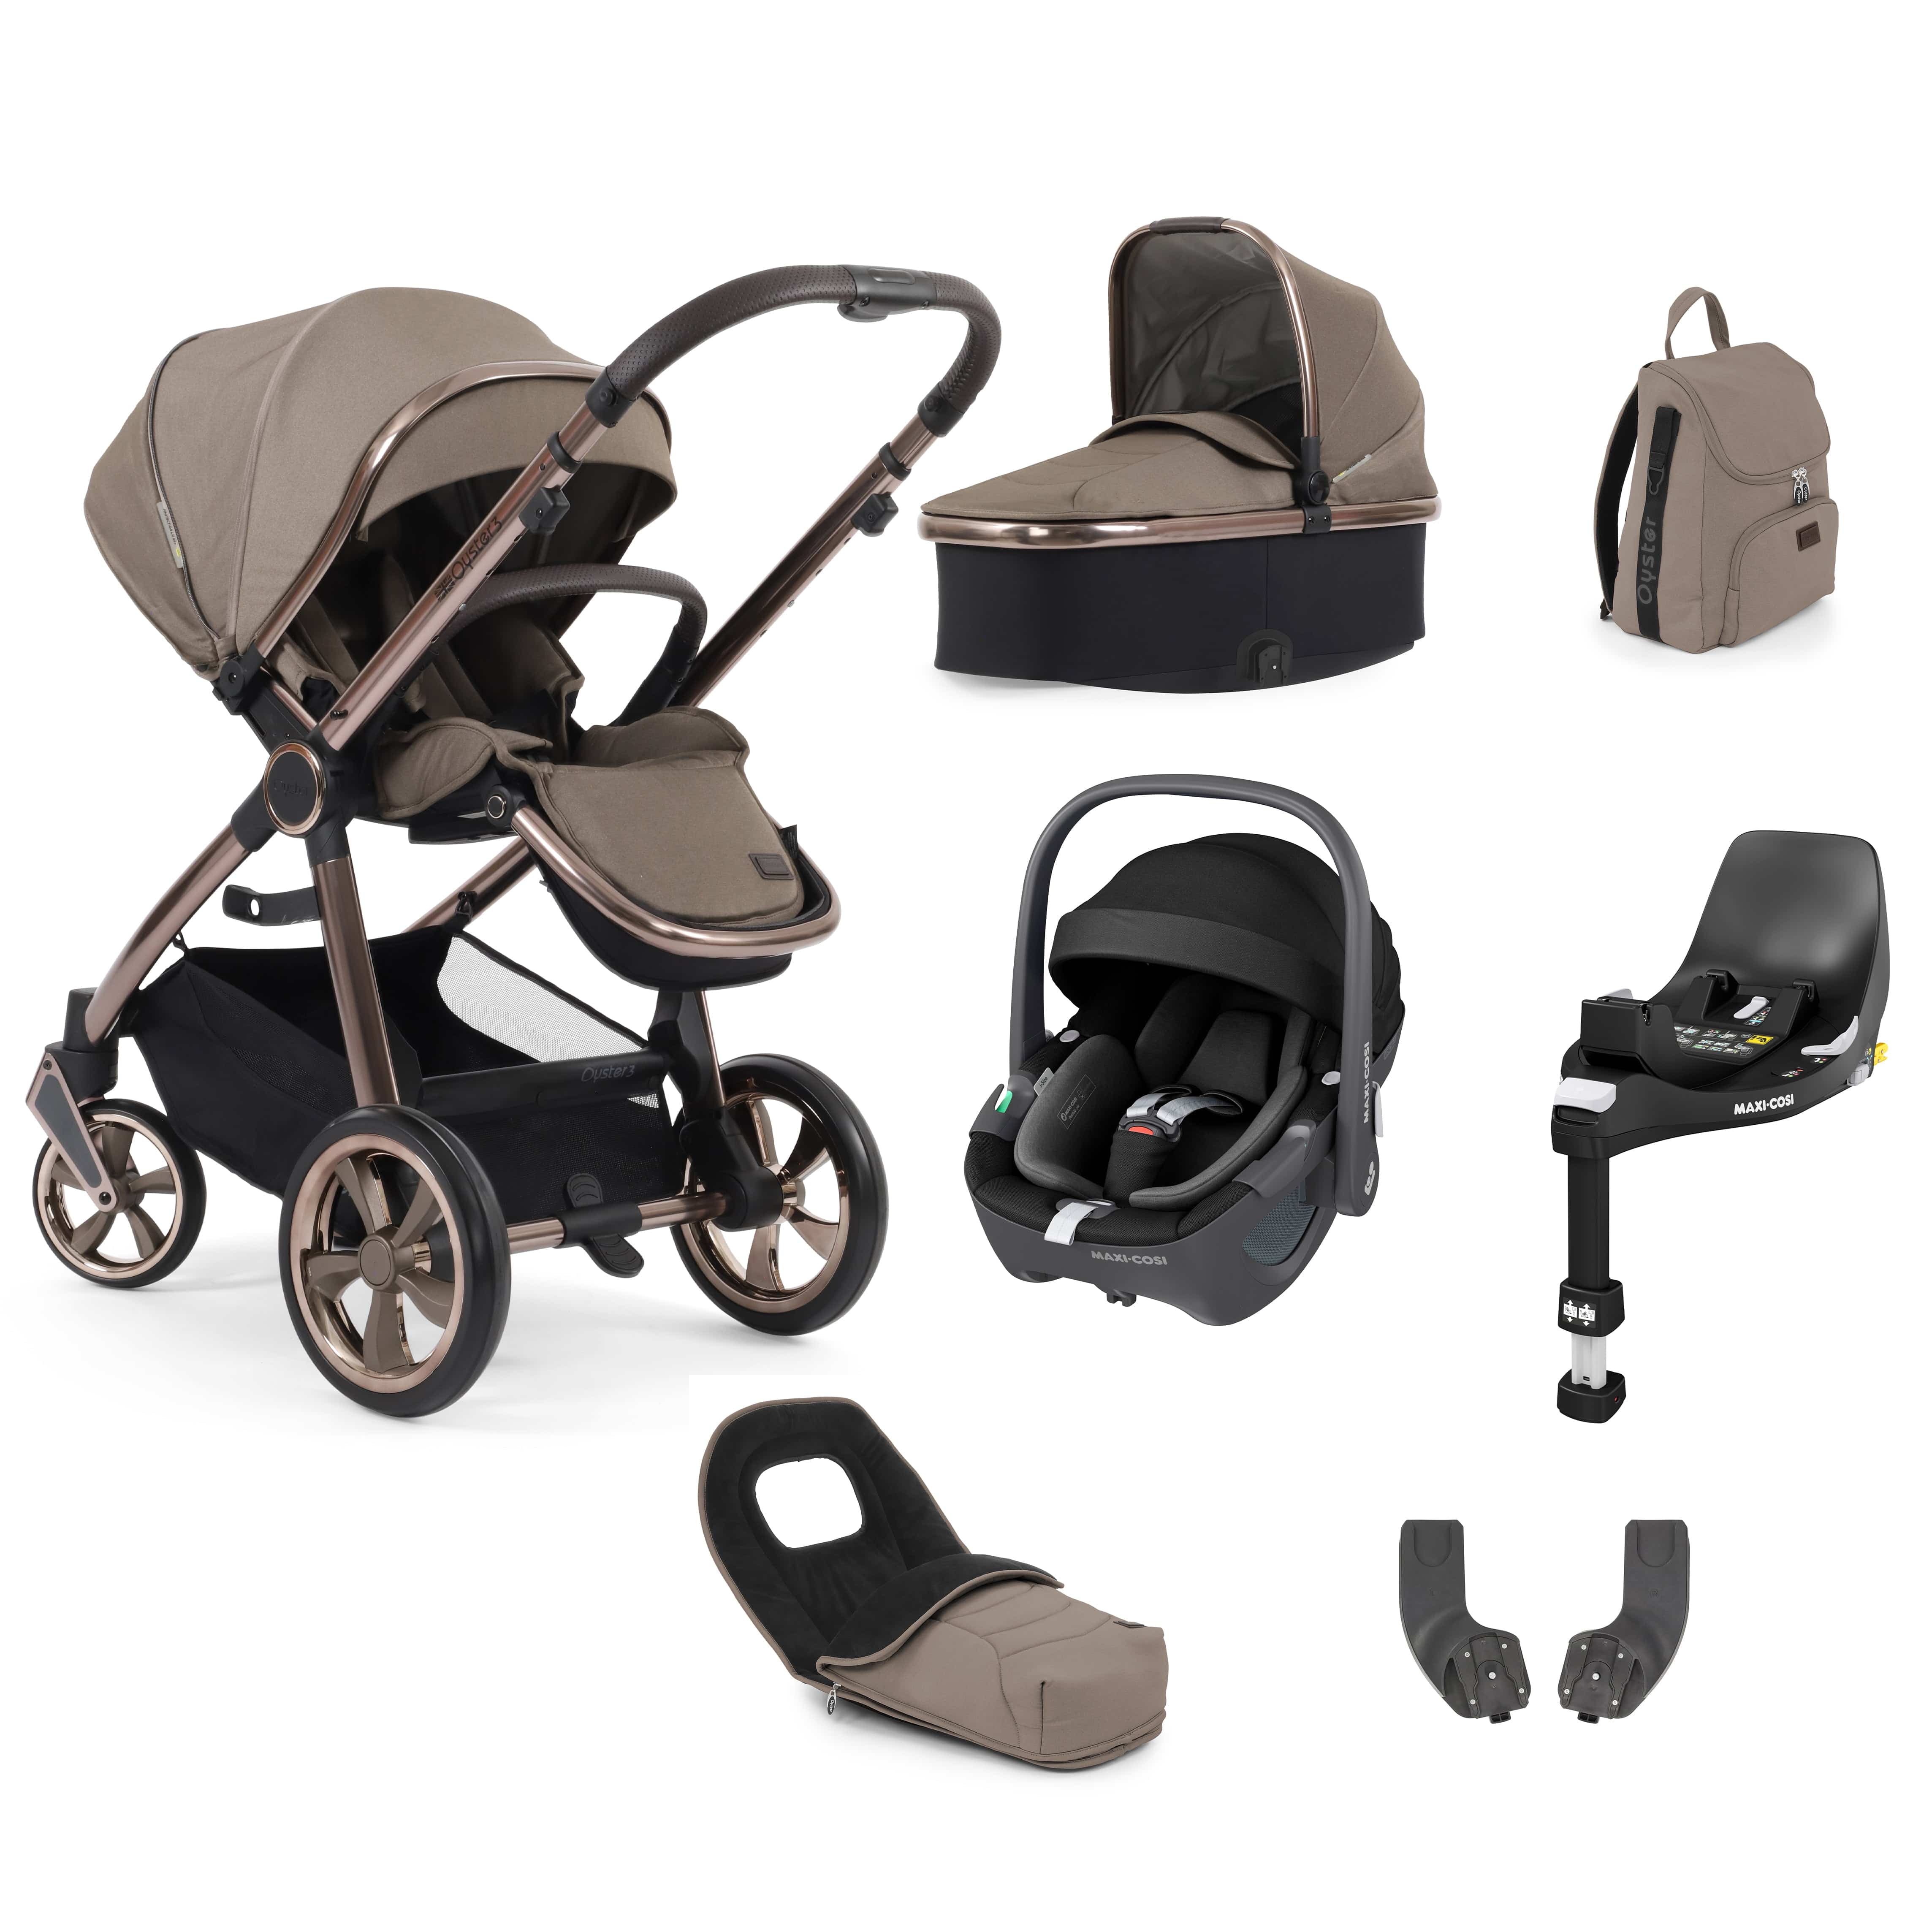 Babystyle Oyster 3 Luxury 7 Piece with Car Seat Bundle in Mink Travel Systems 14807-MNK 5060711566894